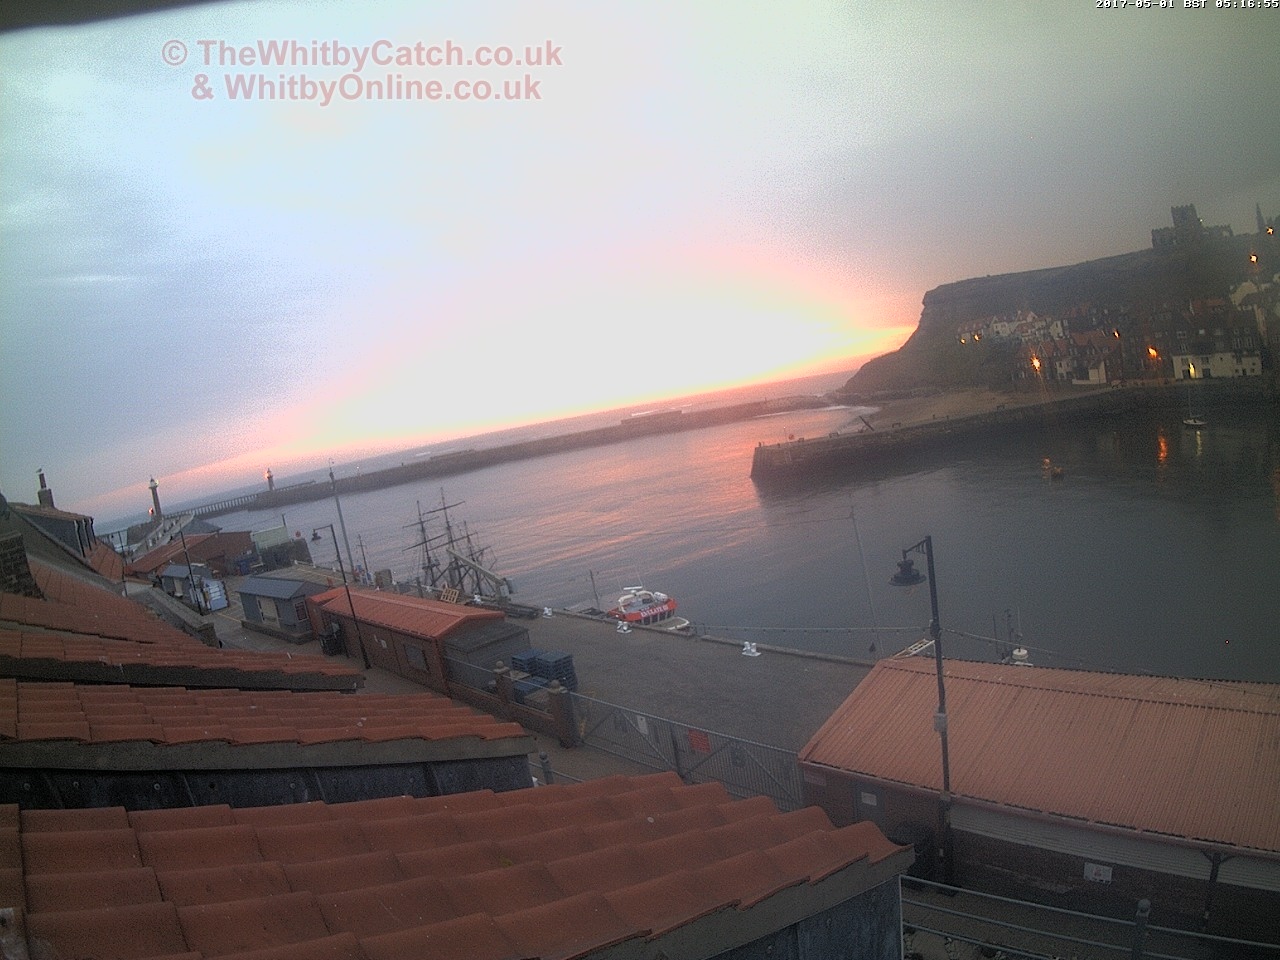 Whitby Mon 1st May 2017 05:17.